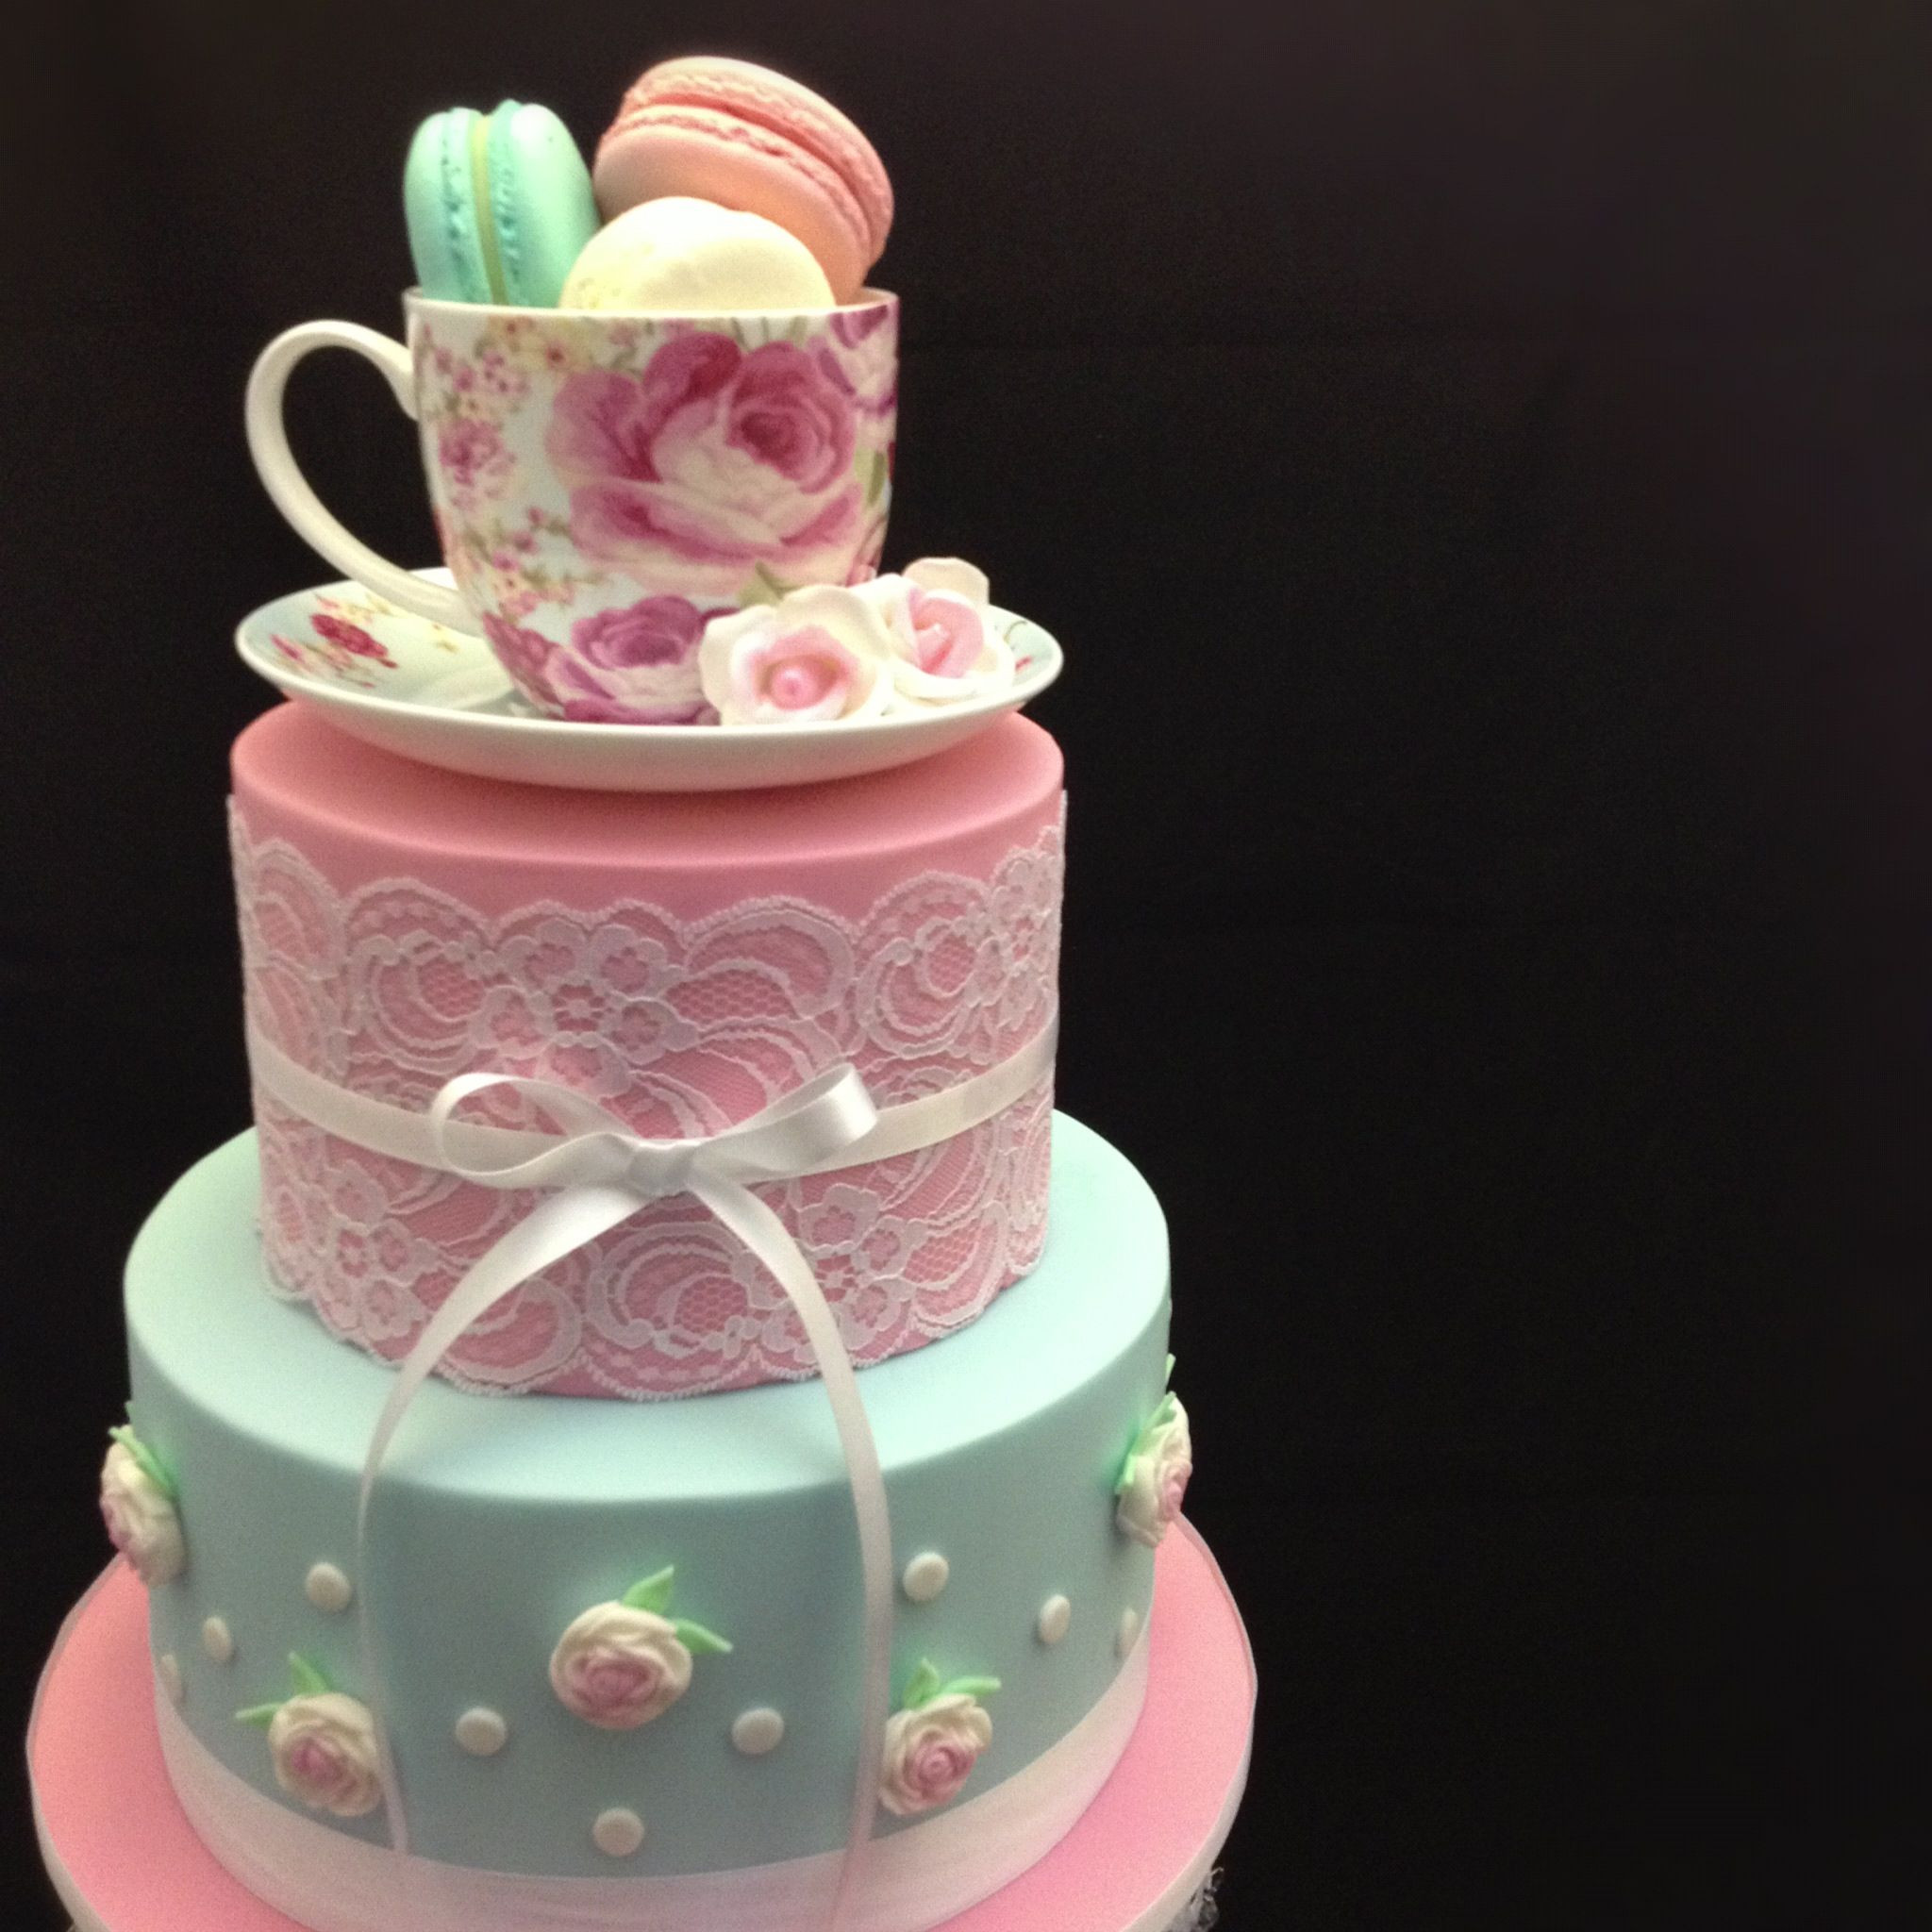 Tea Party Baby Shower Cake
 Tea Party Bridal Shower Cake